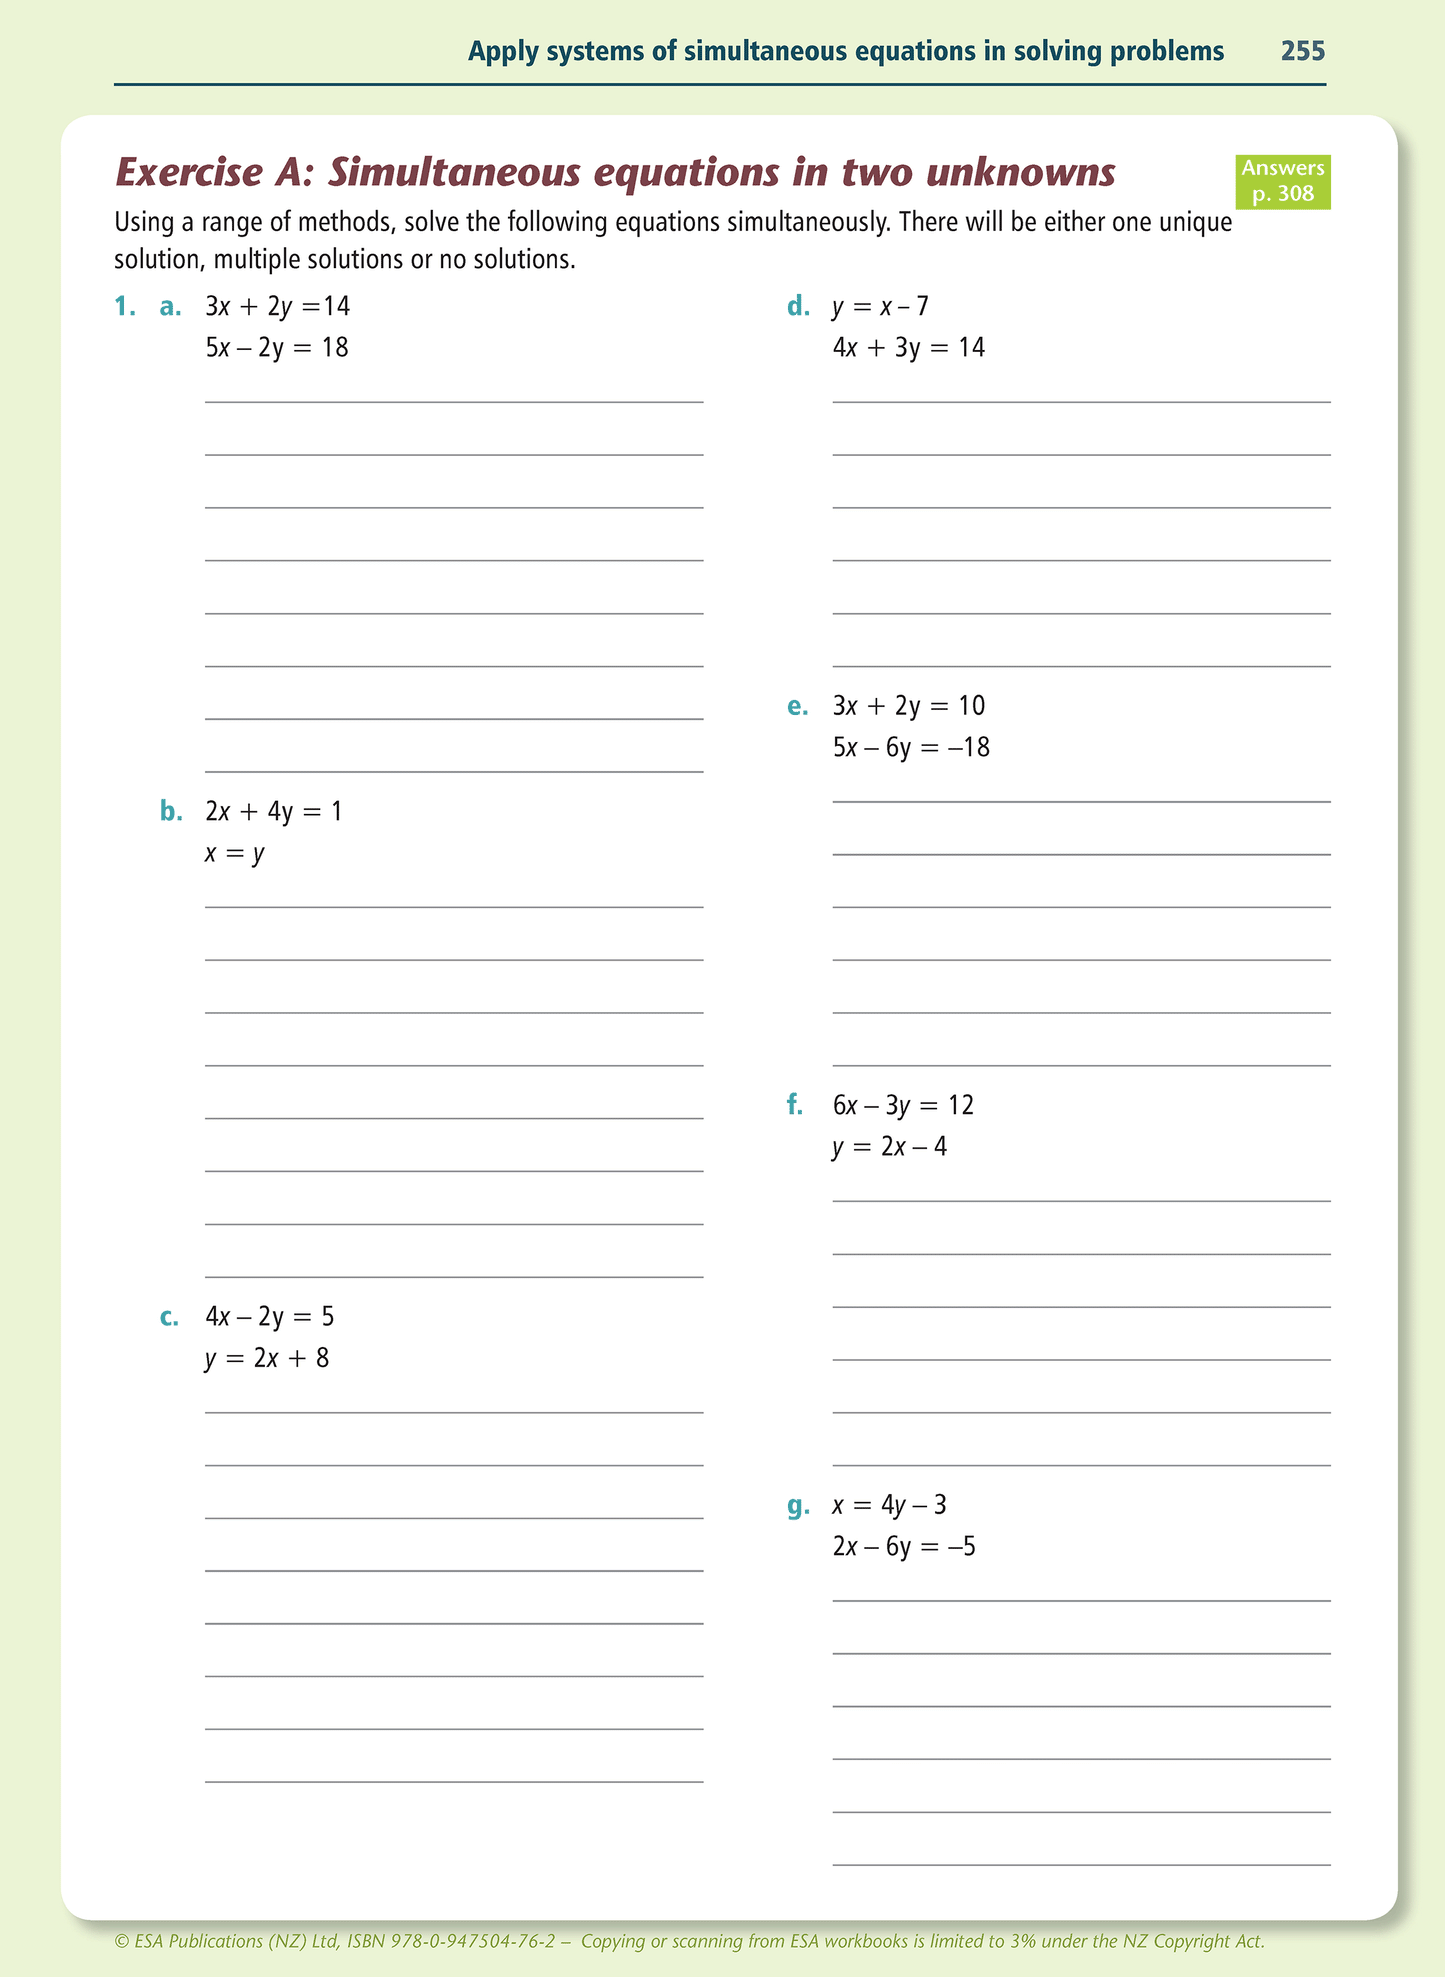 Level 3 Calculus Learning Workbook